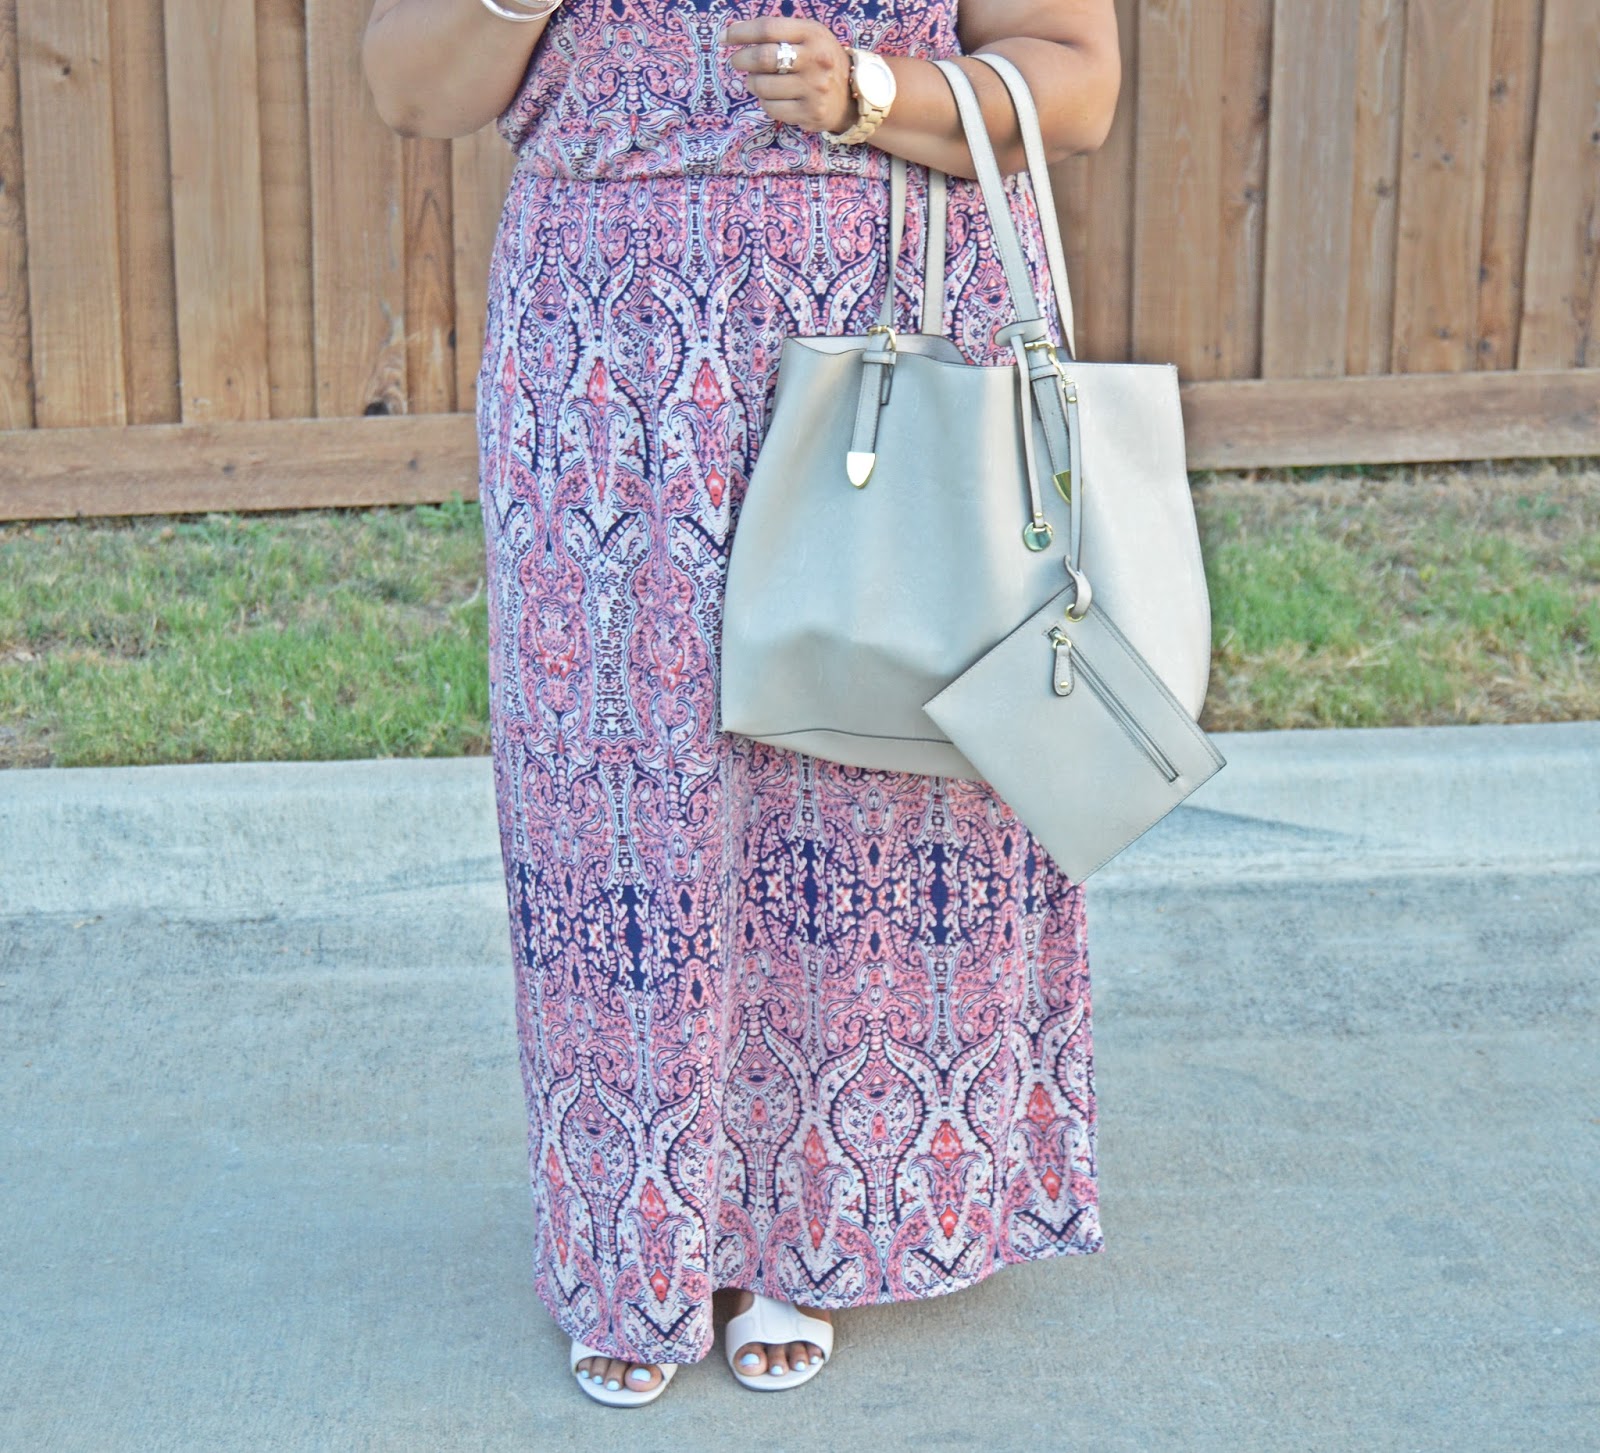 MAXIMIZE YOUR SUMMER WITH A MAURICES MAXI DRESS